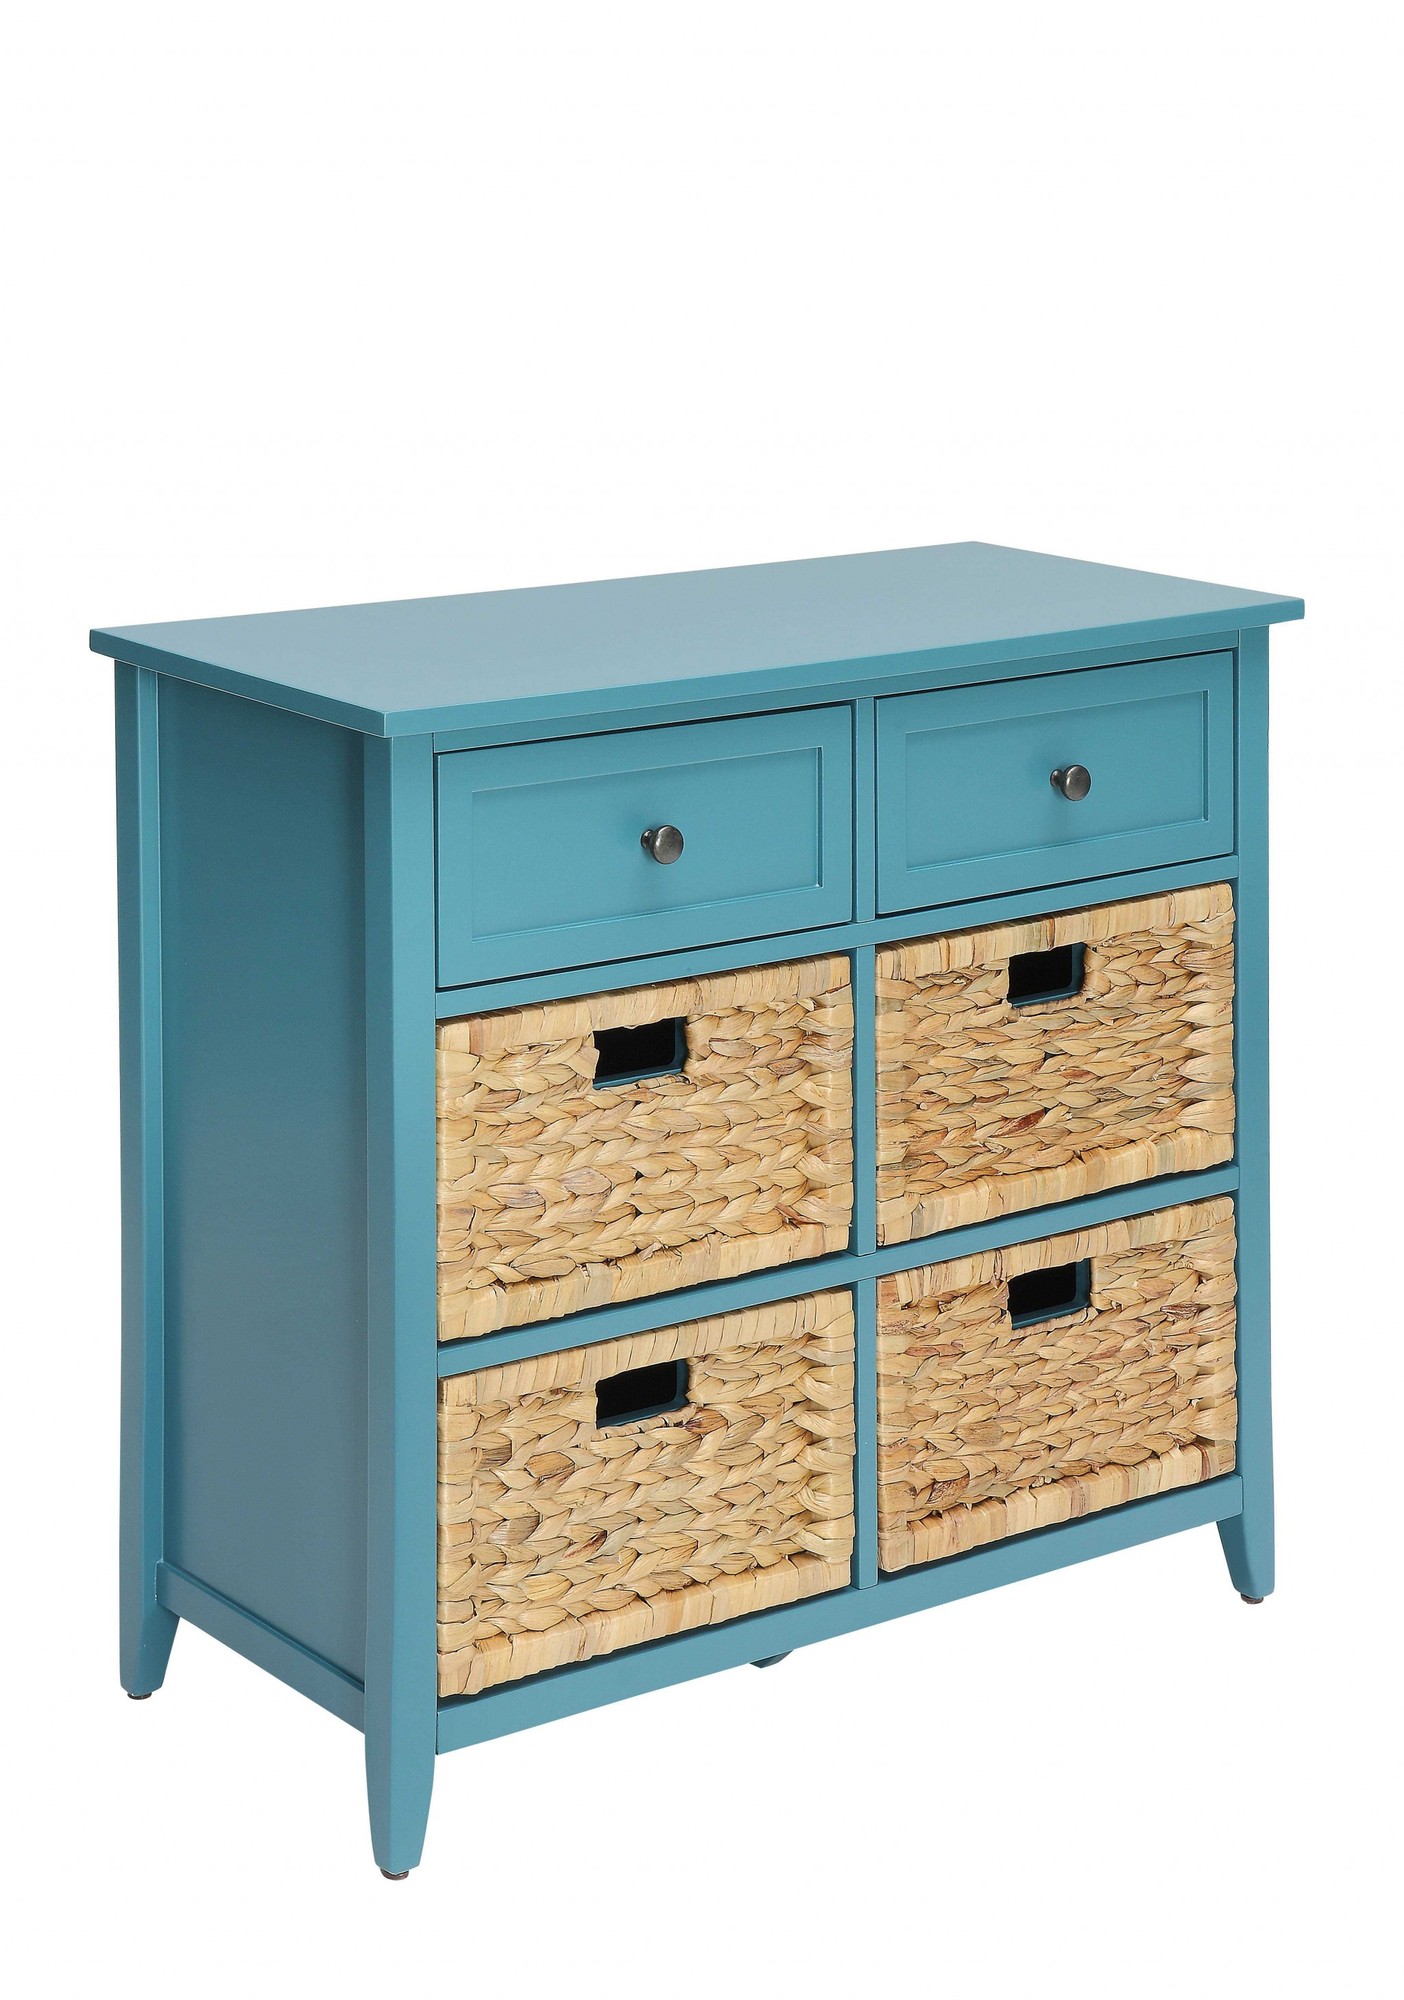 30" X 13" X 28" Teal Wood Veneer 6 Drawers Accent Chest